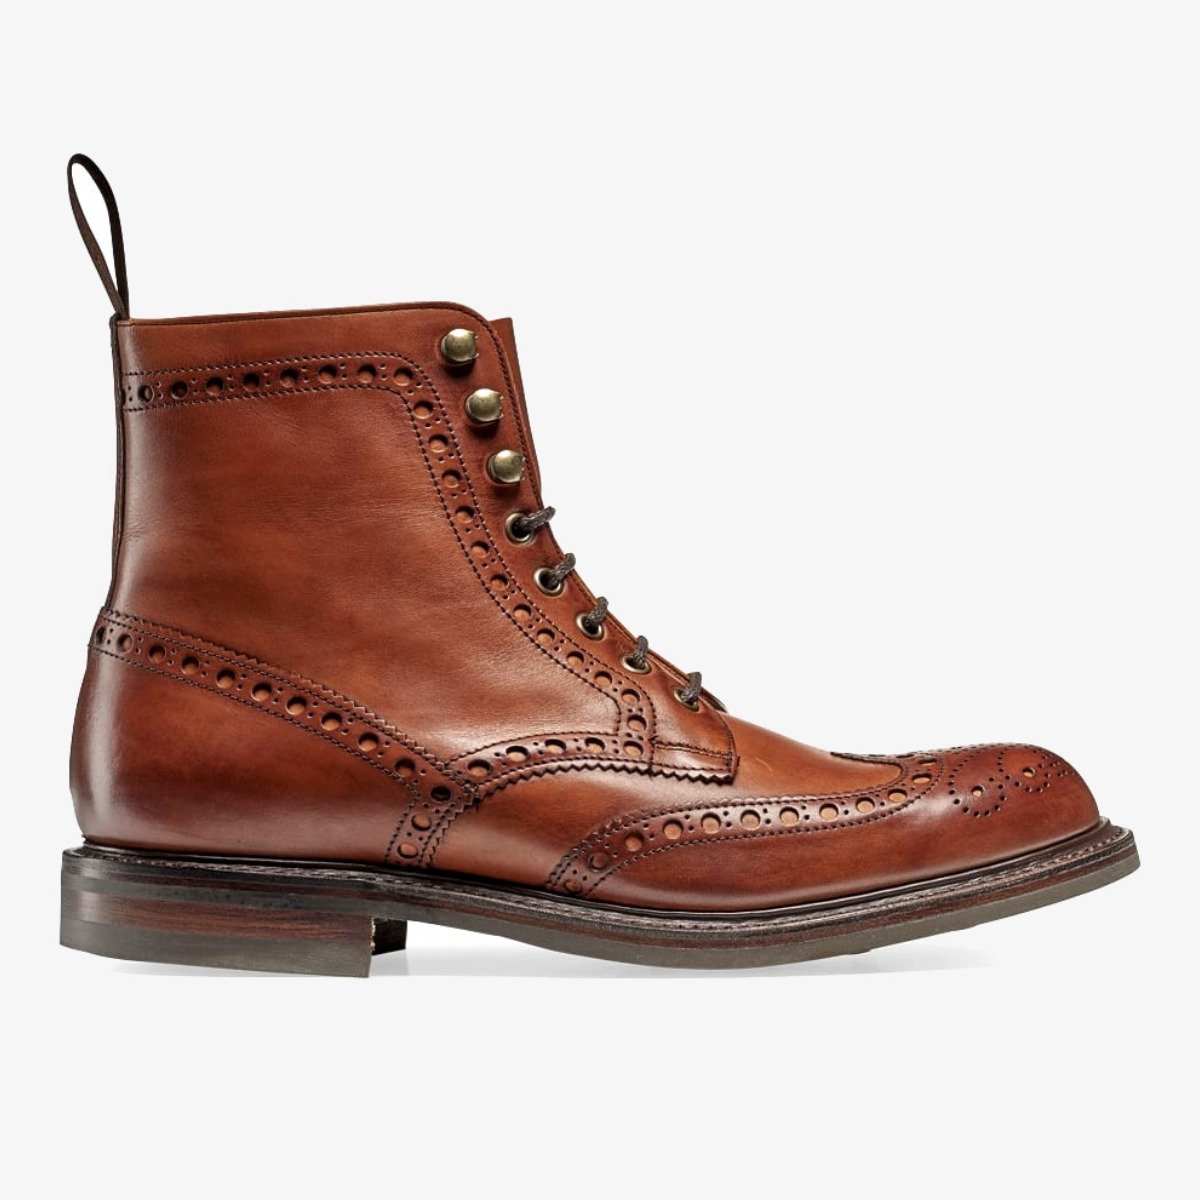 Cheaney Tweed dark leaf brogue men's lace-up boots